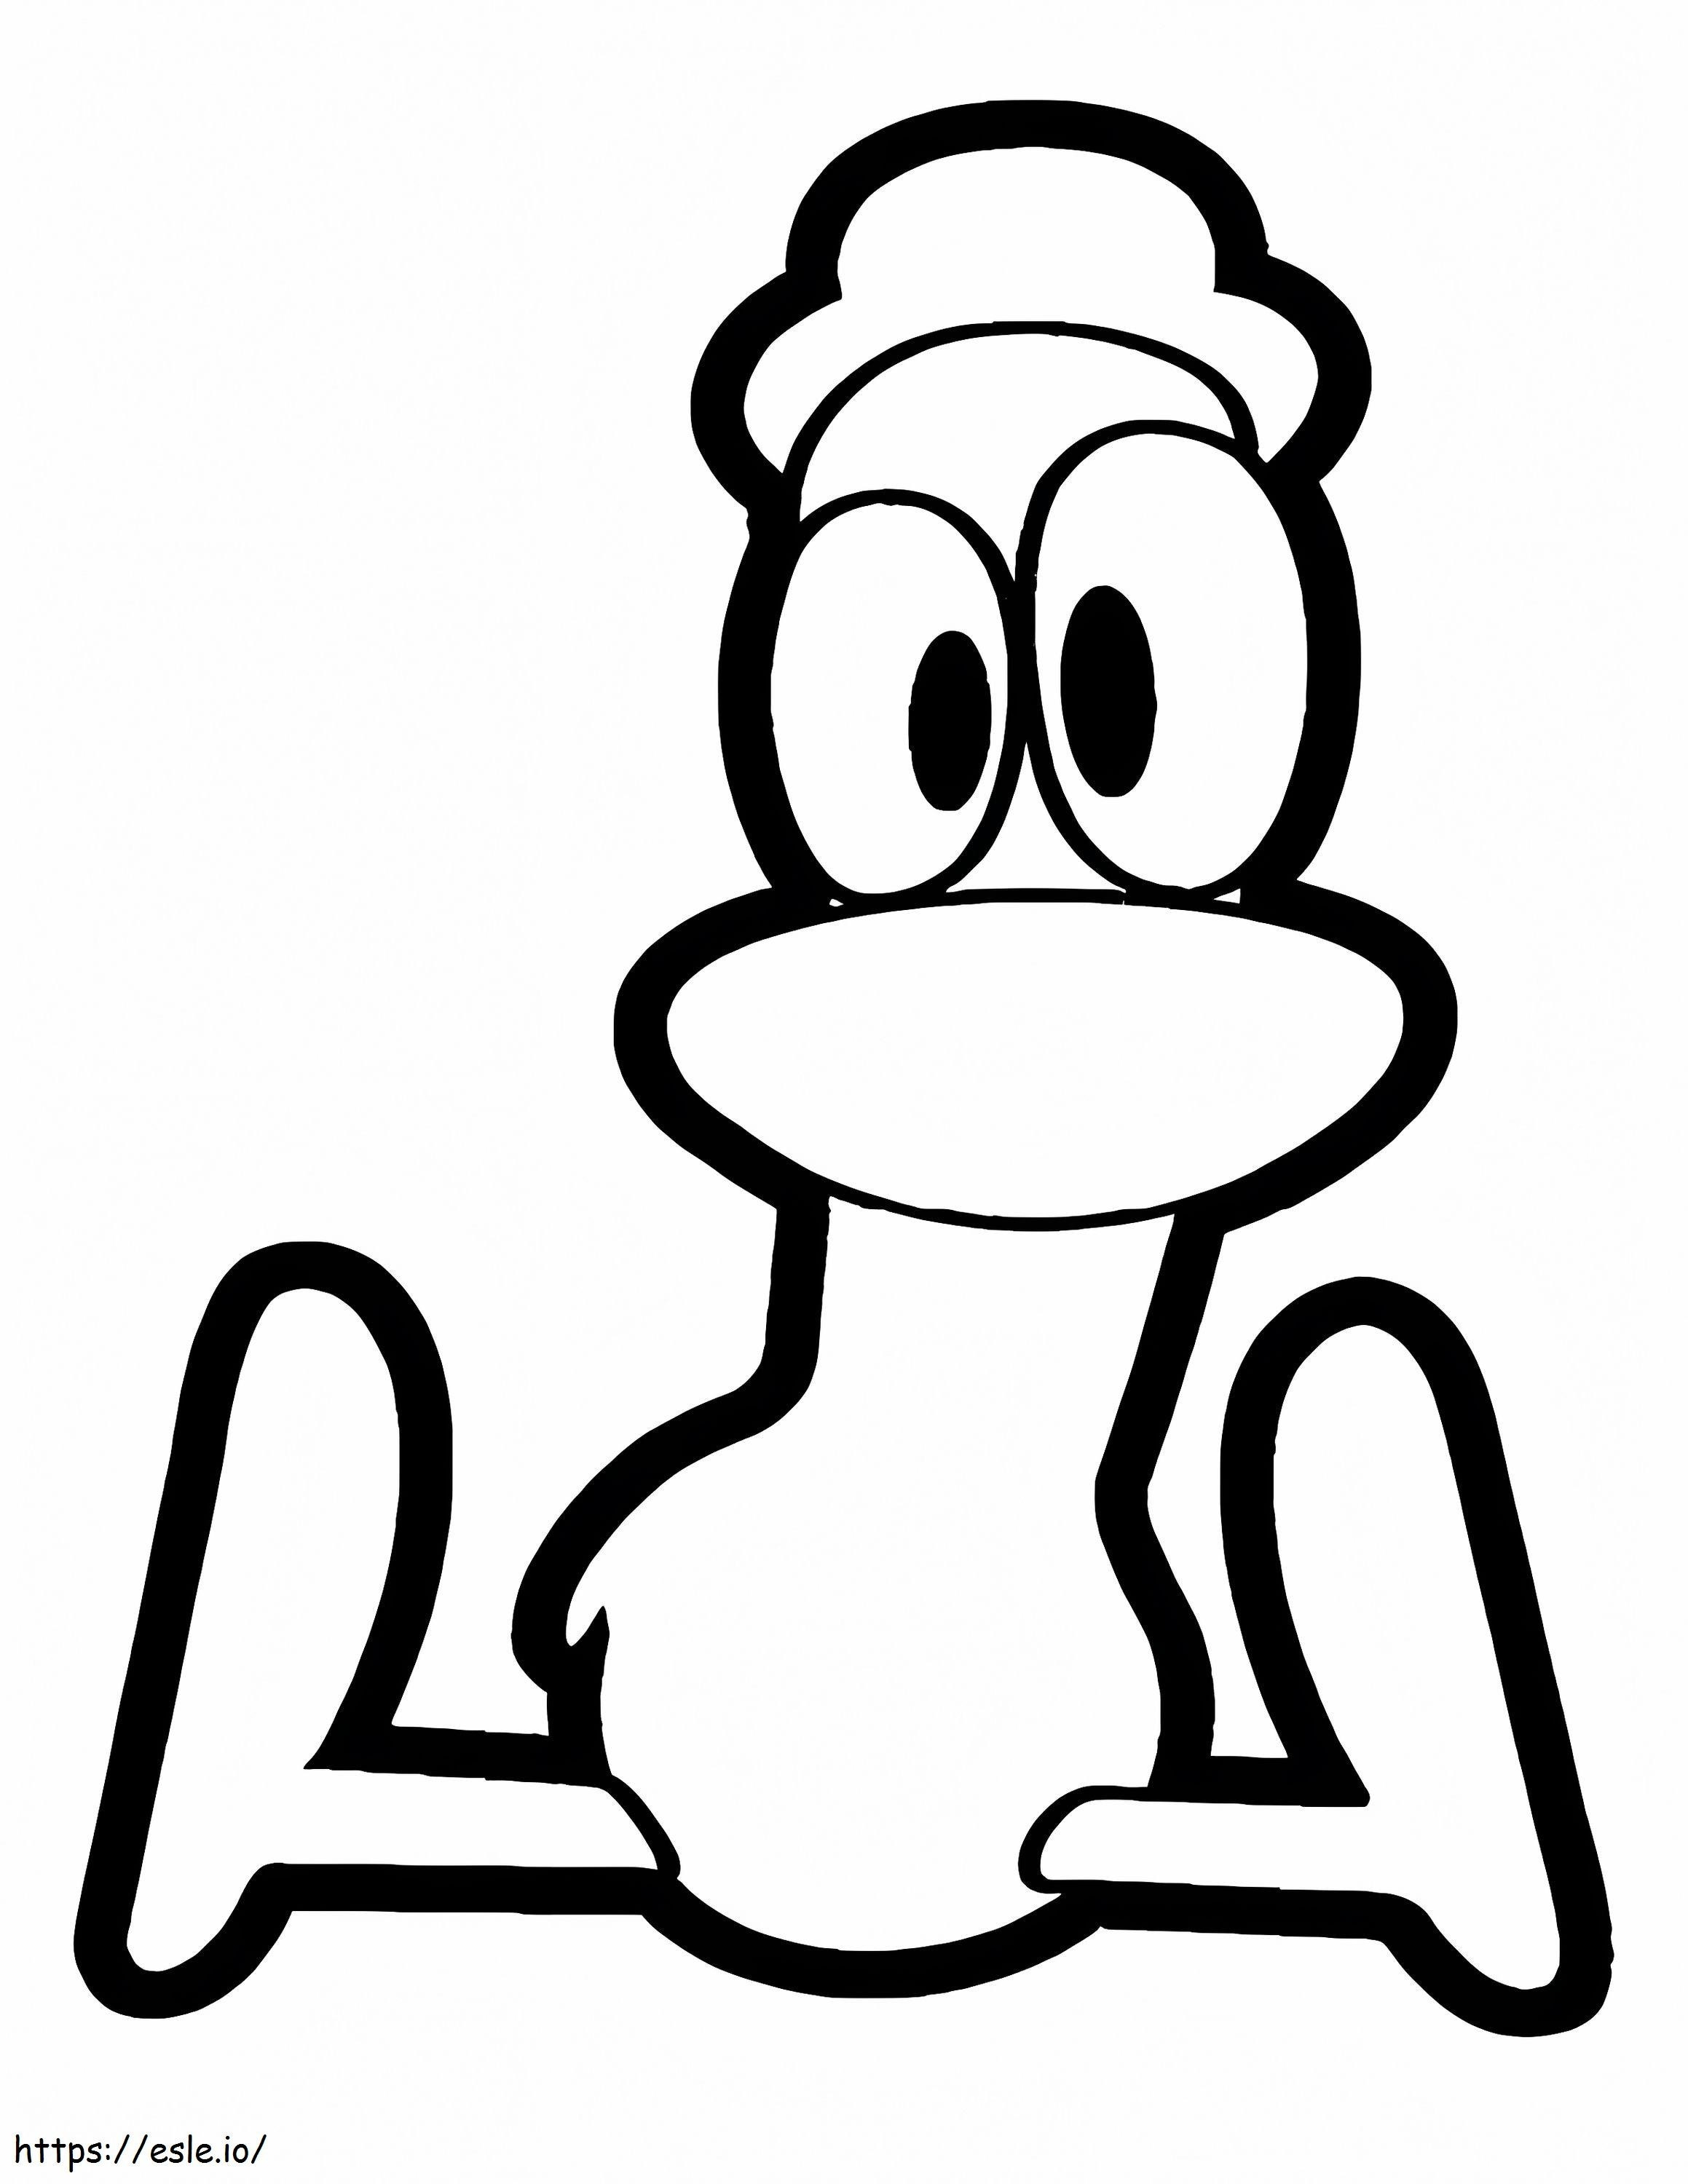 Pocoyo is Sitting Coloring Pages - Free Printable Coloring Pages